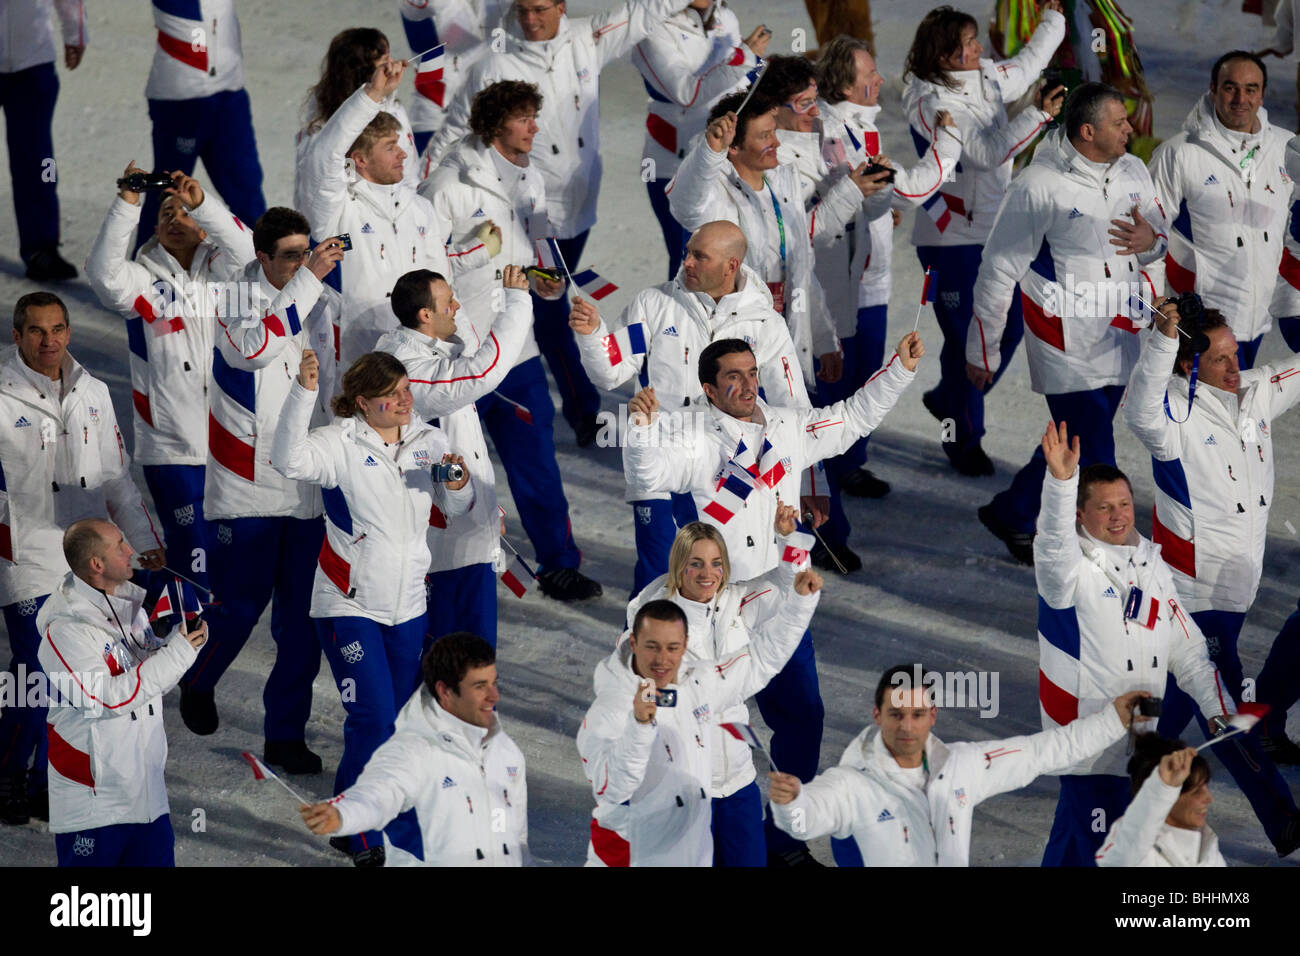 French athletes marching in at the opening ceremonies of the 2010 Olympic Winter games, Vancouver, British Columbia. Stock Photo